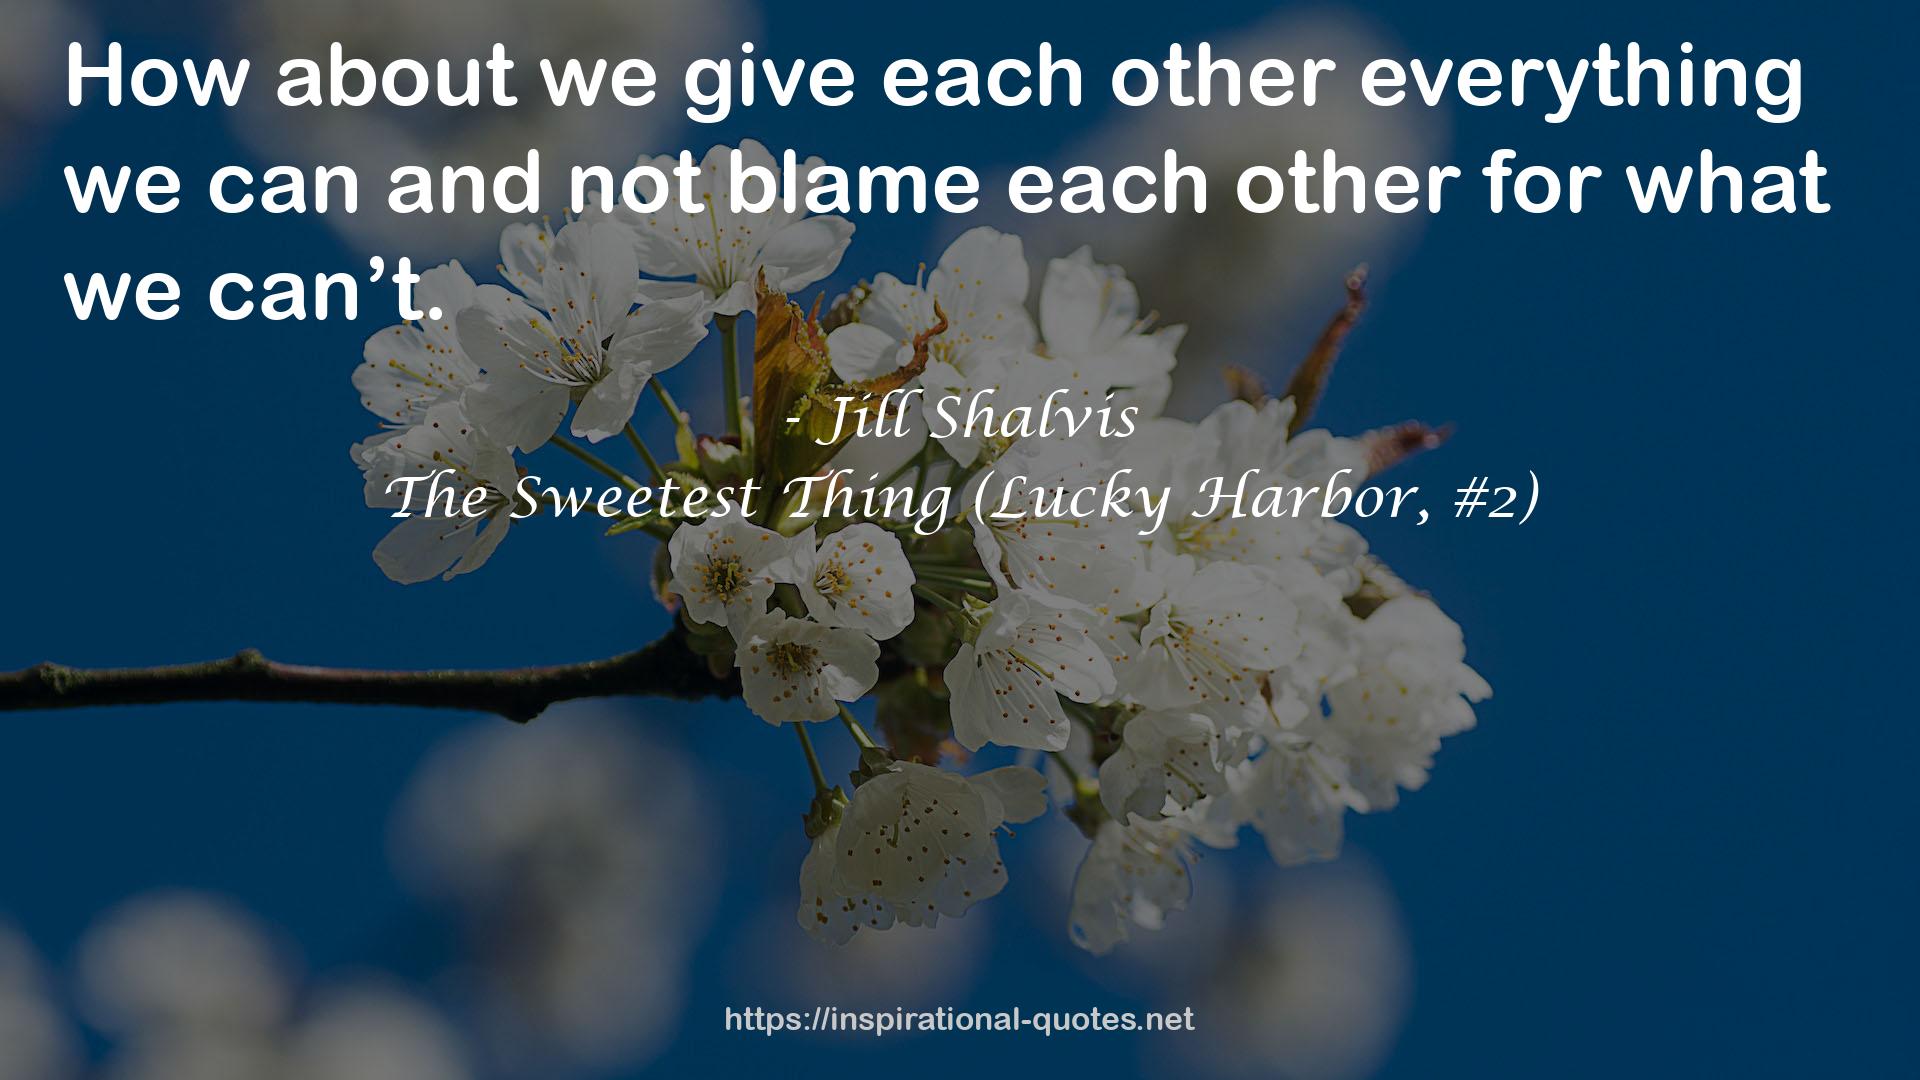 The Sweetest Thing (Lucky Harbor, #2) QUOTES